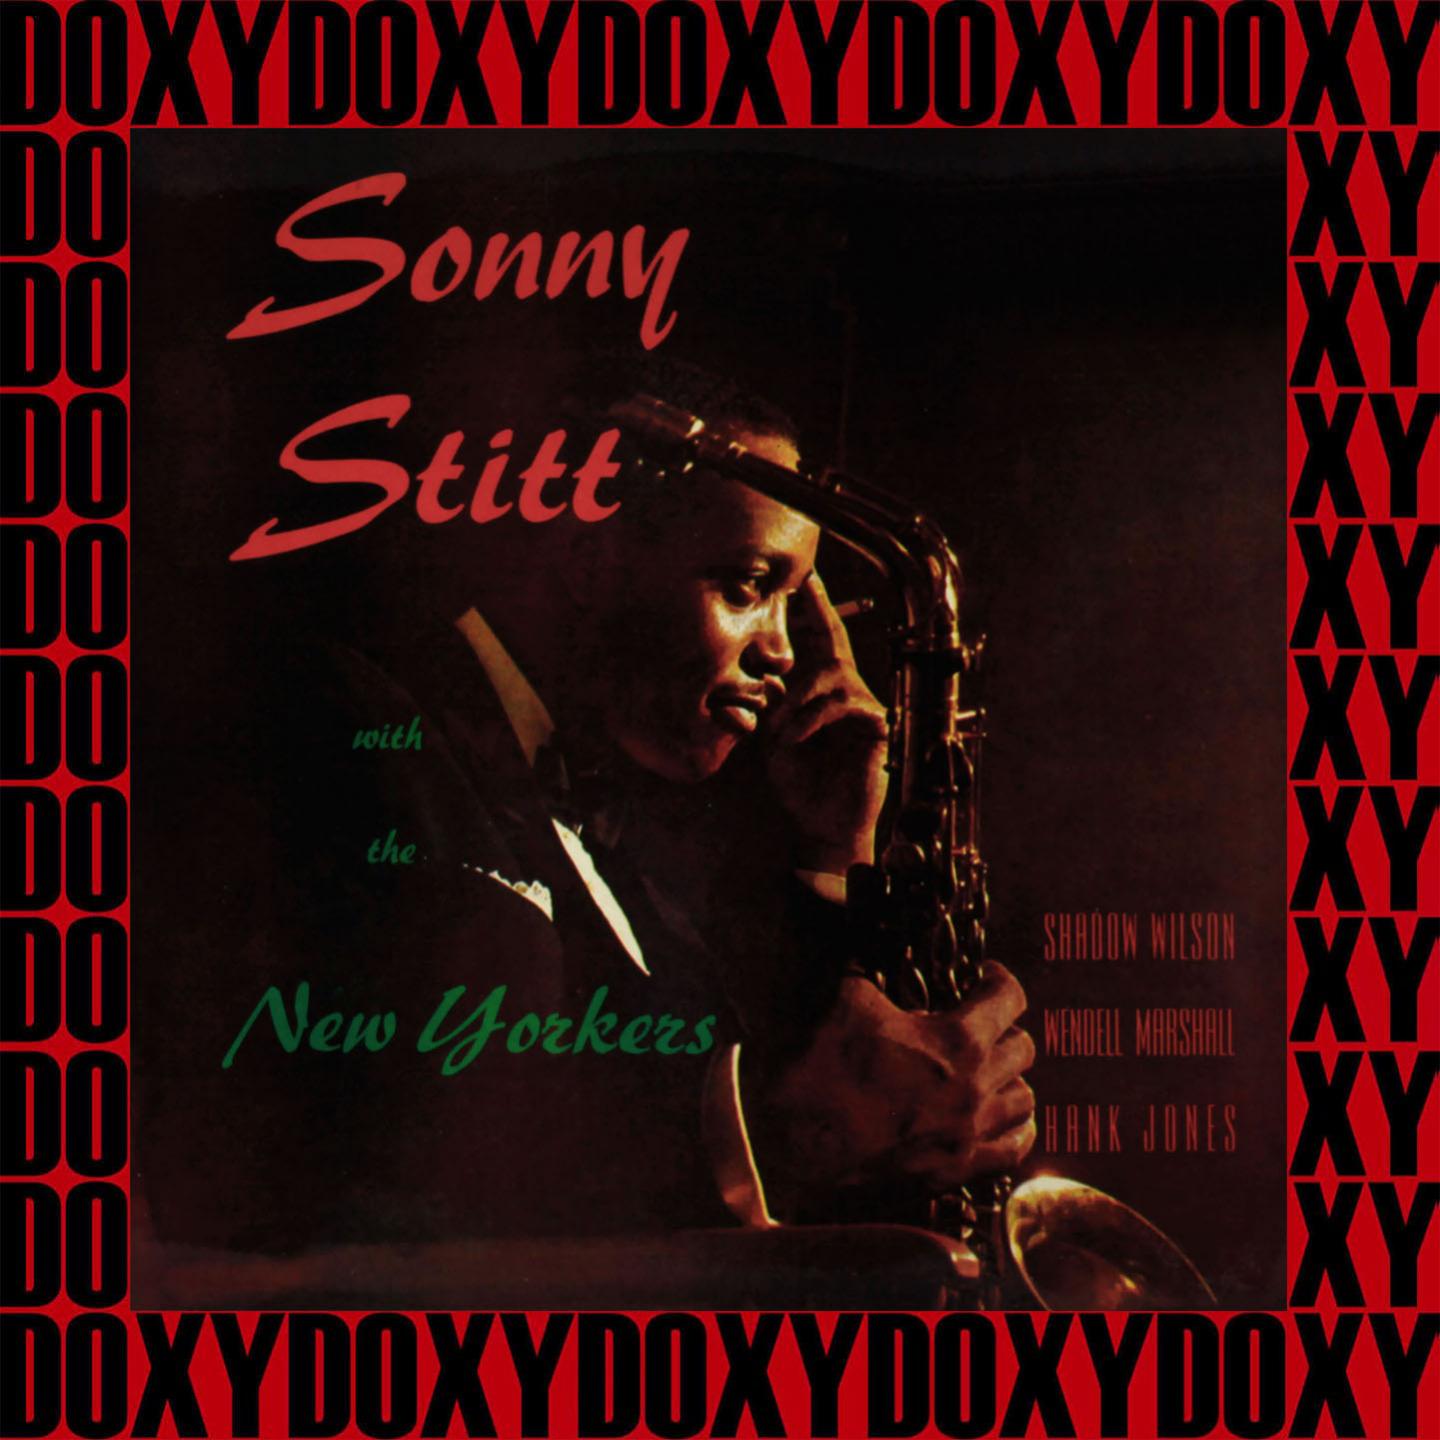 Sonny Stitt with the New Yorkers (Remastered Version) (Doxy Collection)